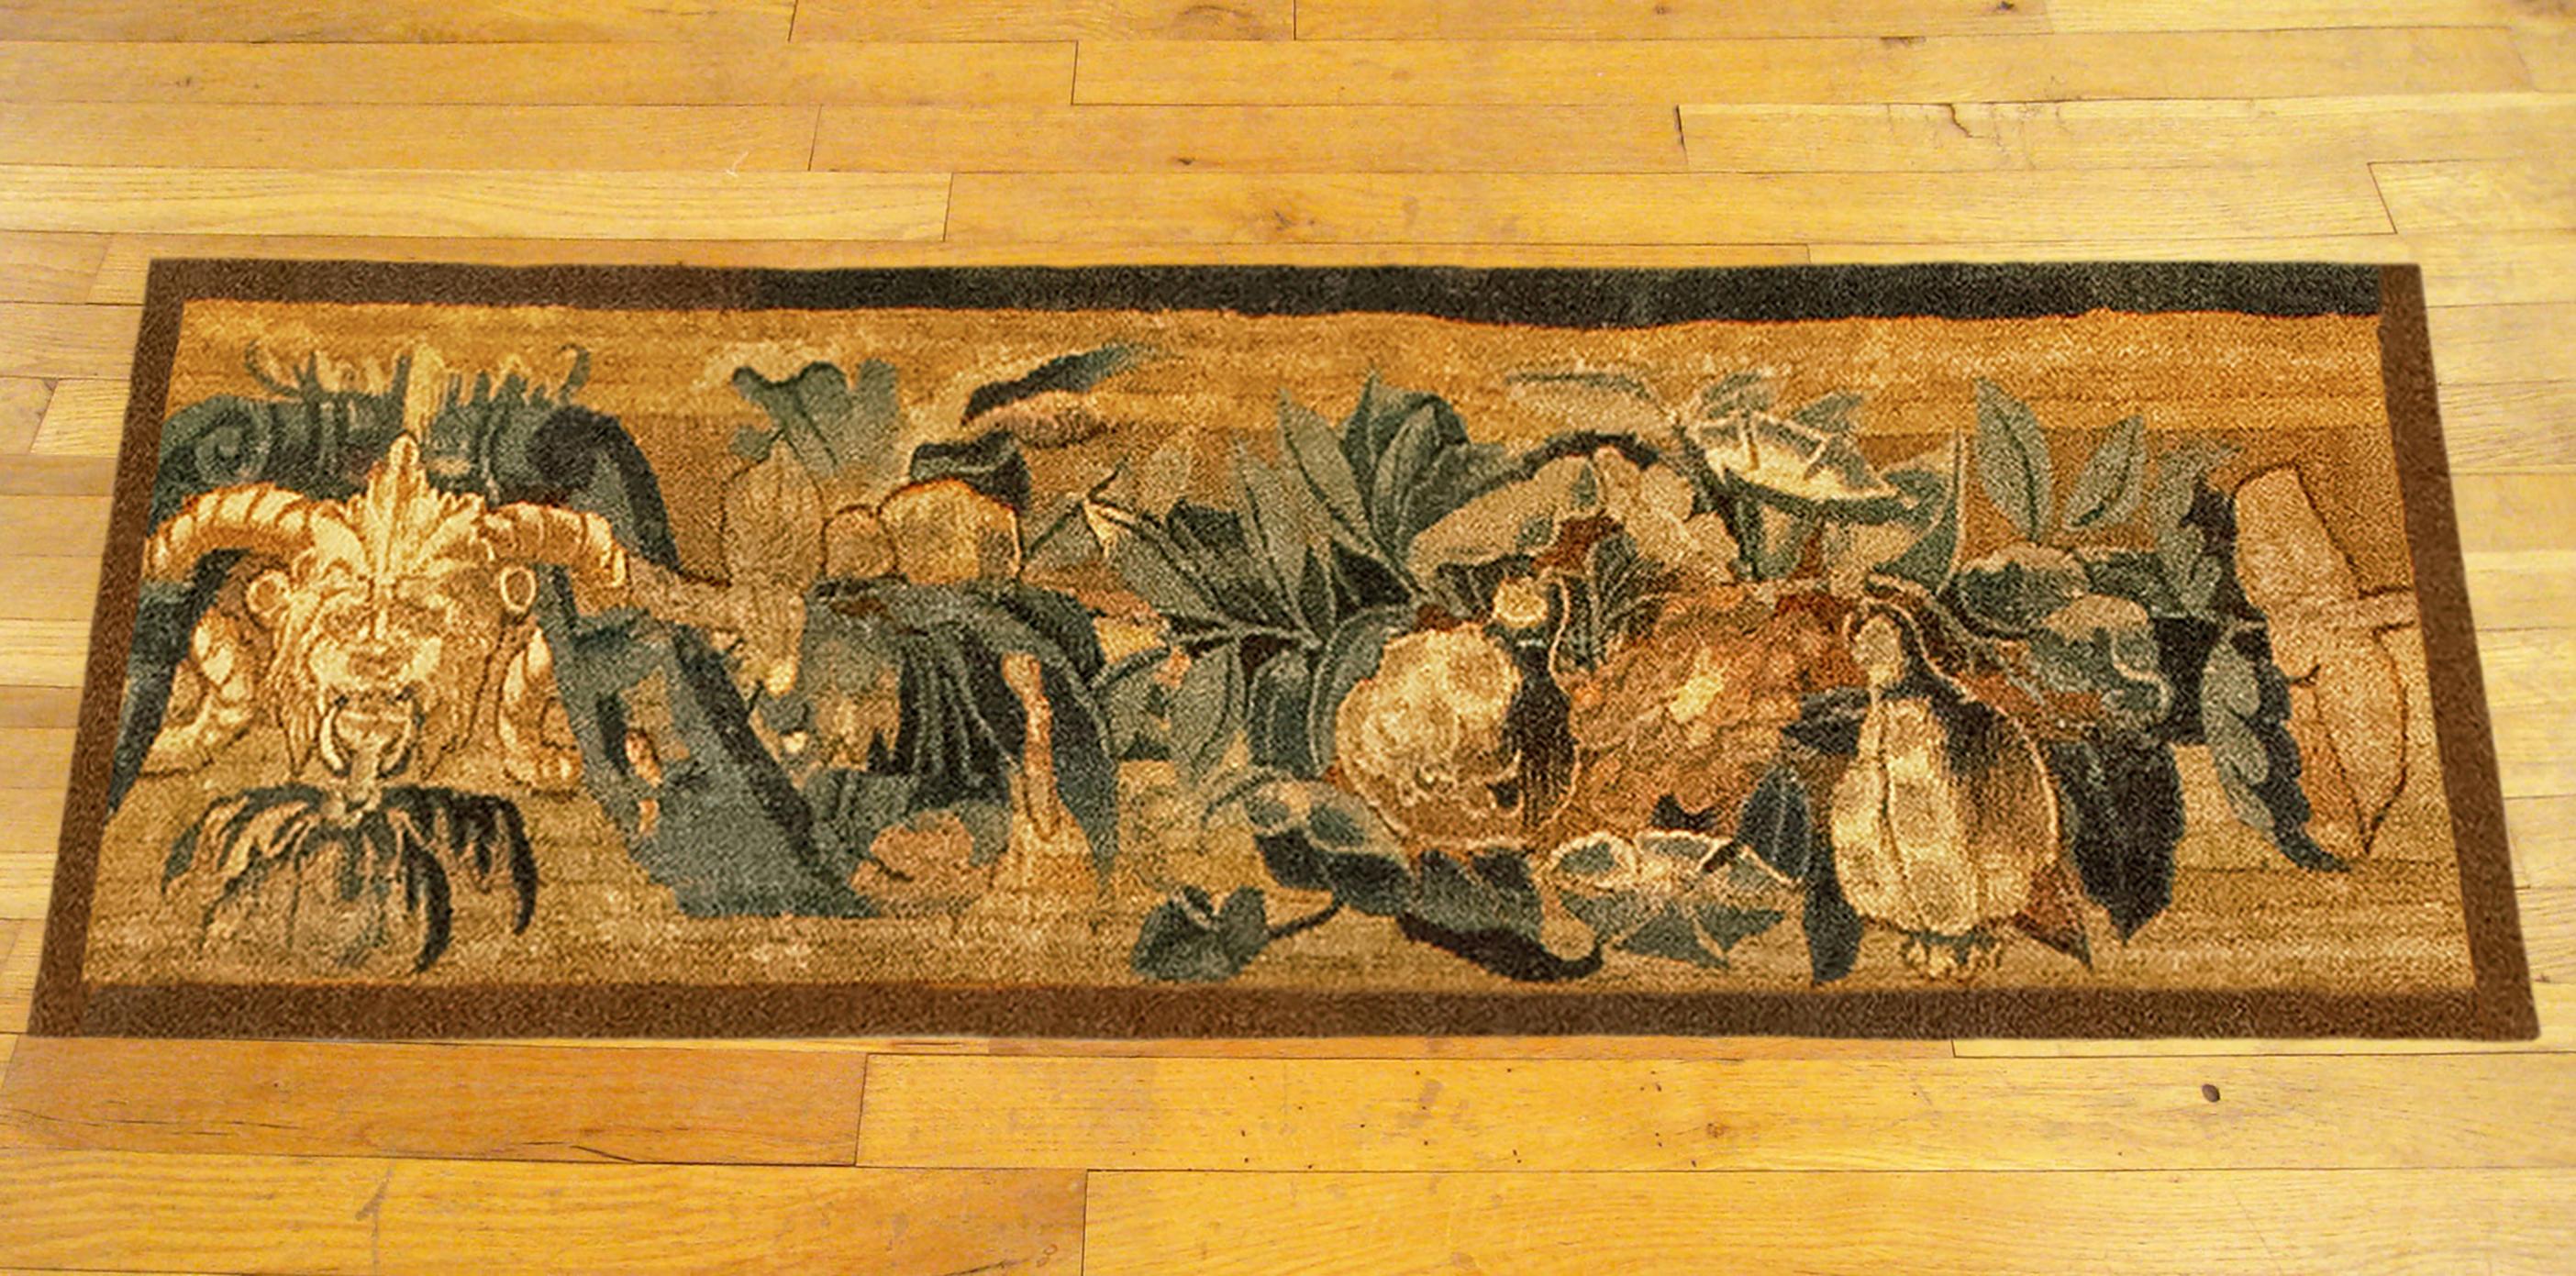 A 16th century Brussels Historical Tapestry panel. This horizontally oriented decorative tapestry panel depicts a scrolling foliate design, with a grotesque on the left side, and with variety of fruiting and flowering elements being envisioned. The